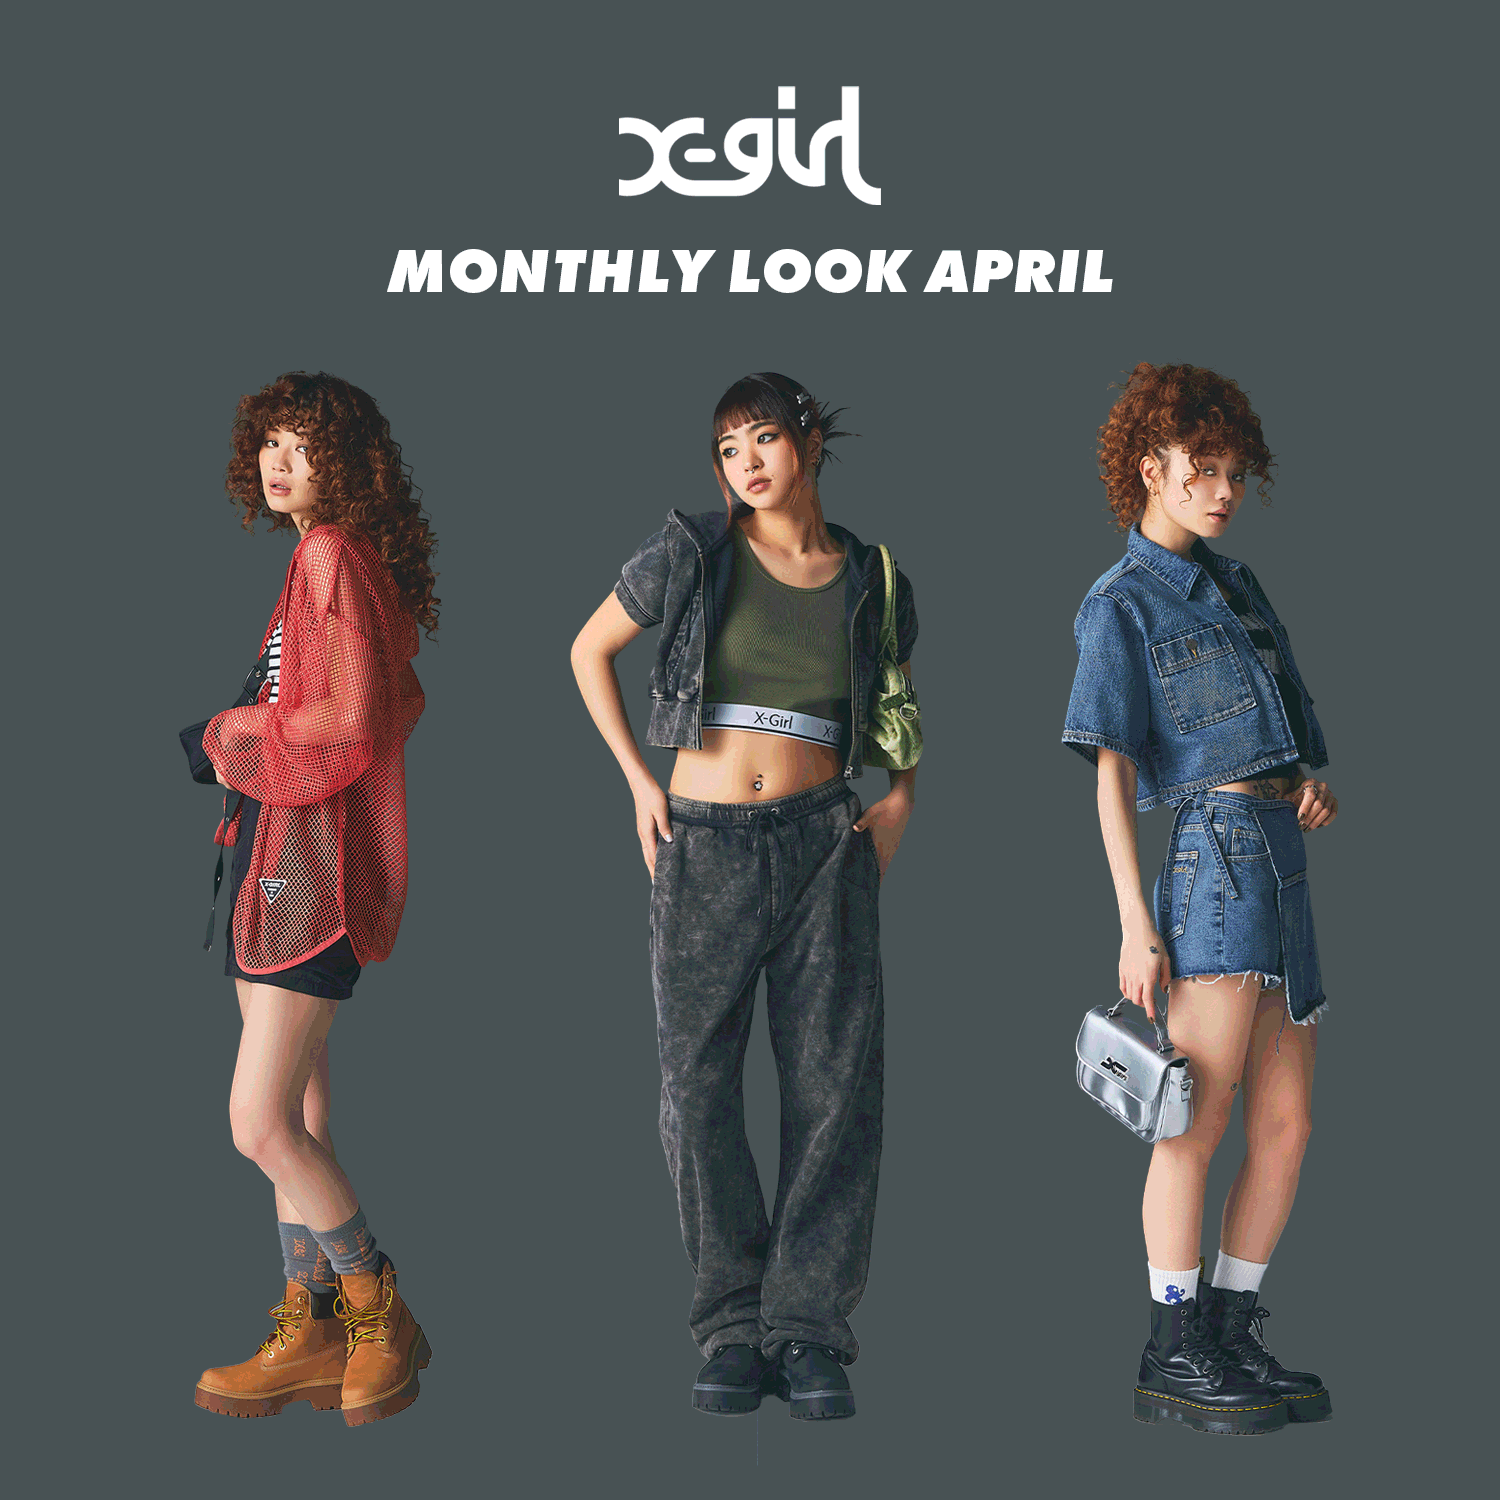 MONTHLY LOOK APRIL